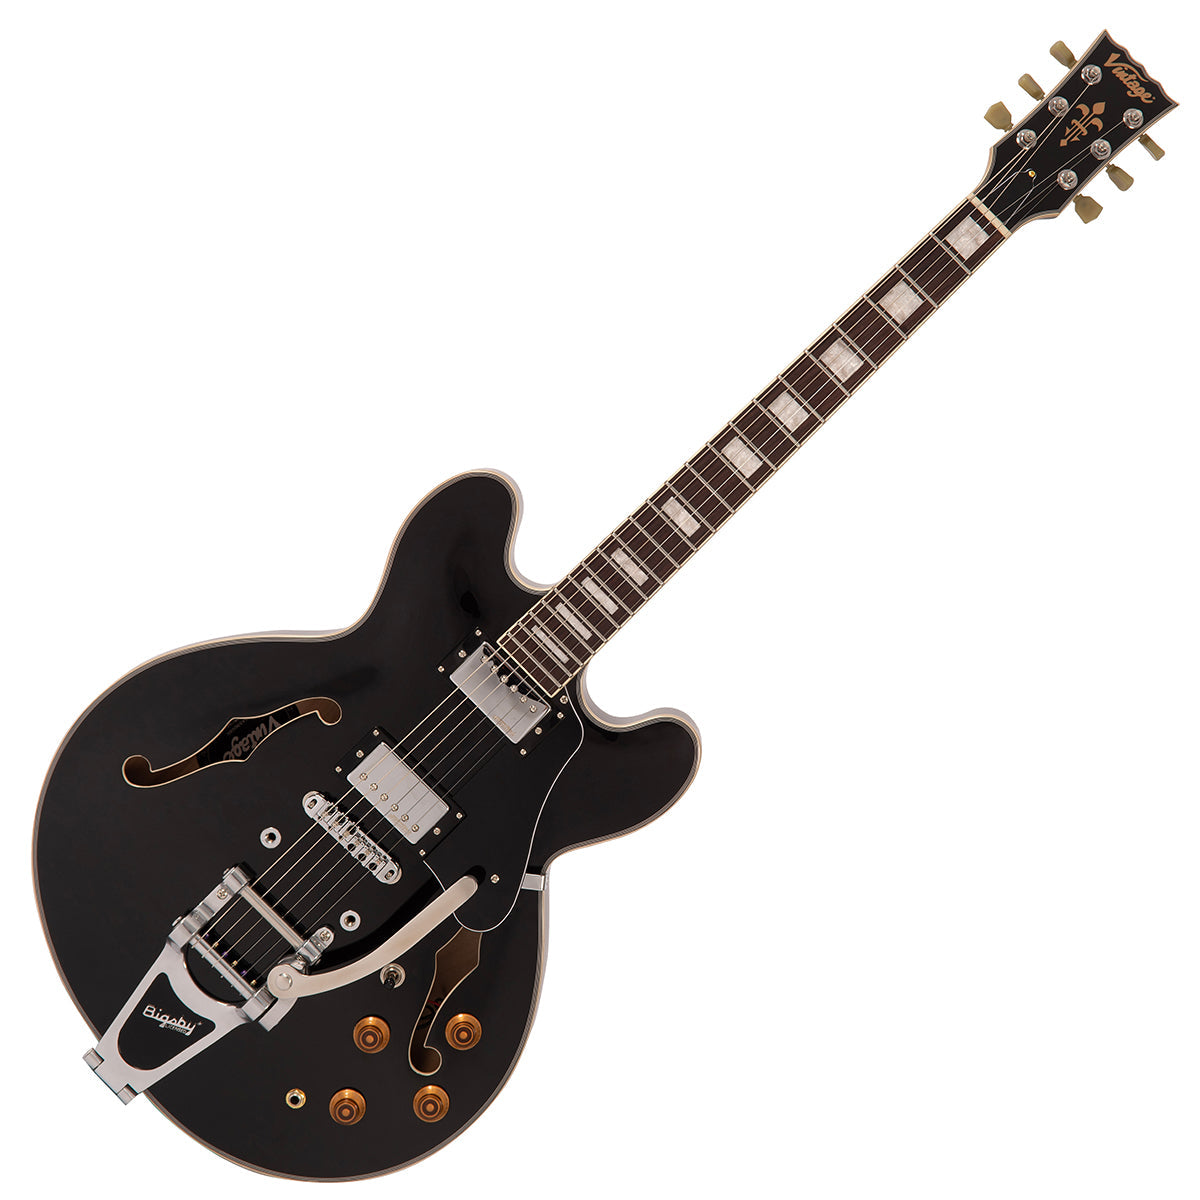 SOLD - Vintage VSA500 ProShop Unique ~ Gloss Black with Bigsby, Electric Guitars for sale at Richards Guitars.